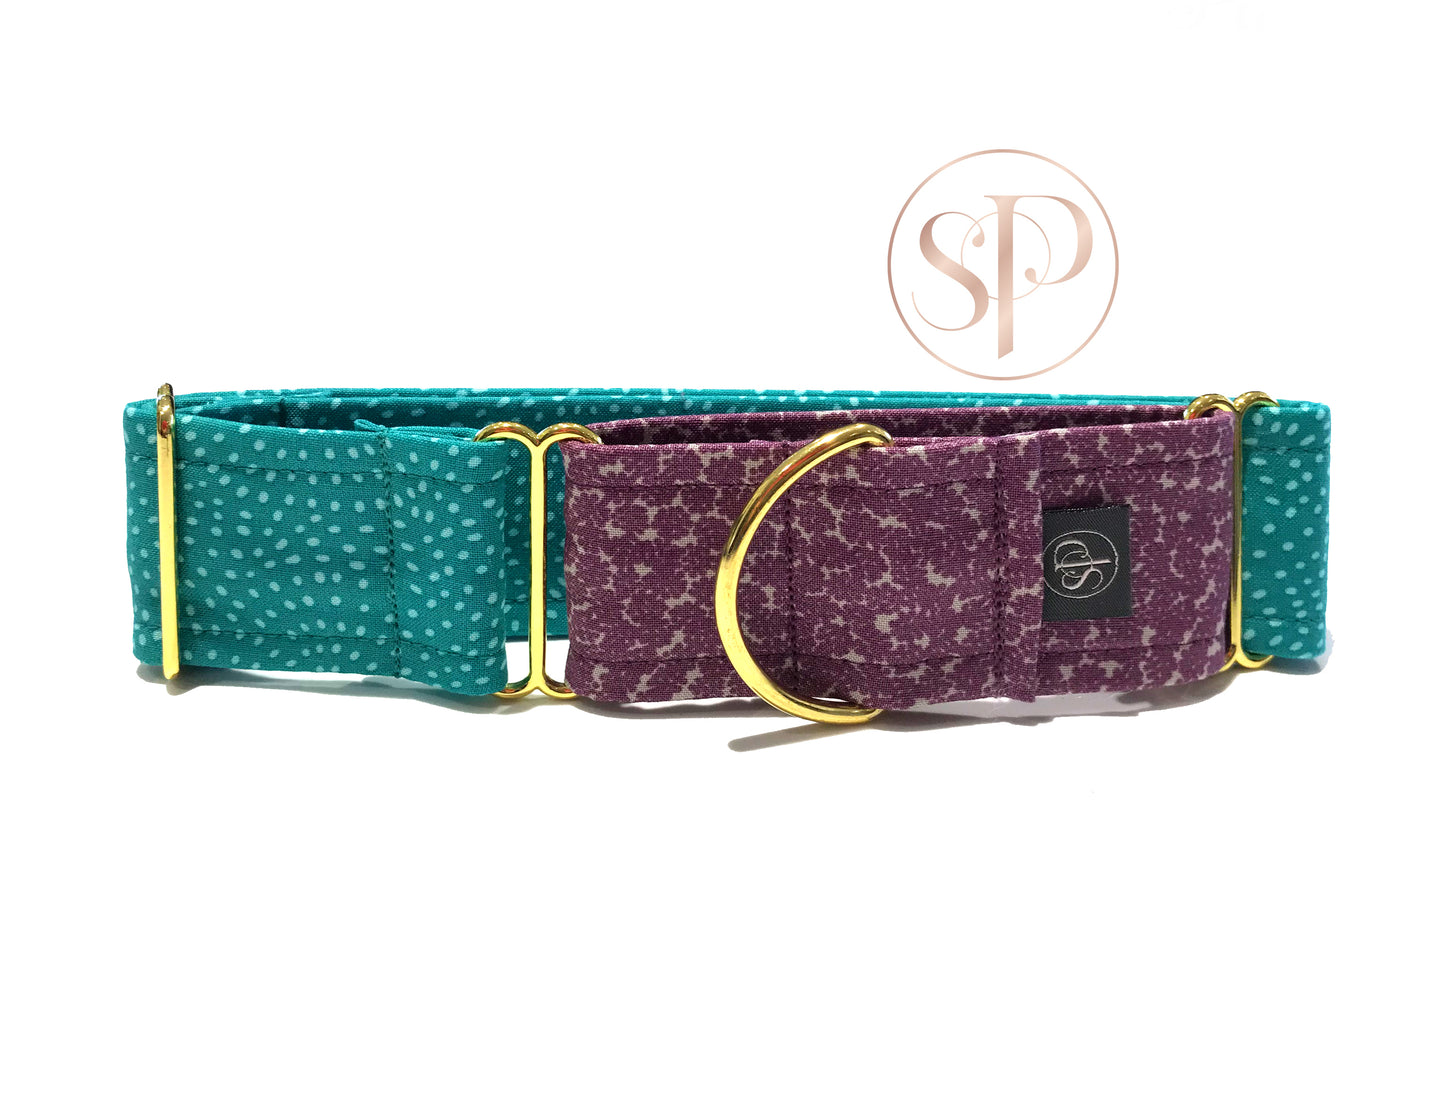 Teal Pippin With Purple Berries Small Loop Martingale Dog Collar